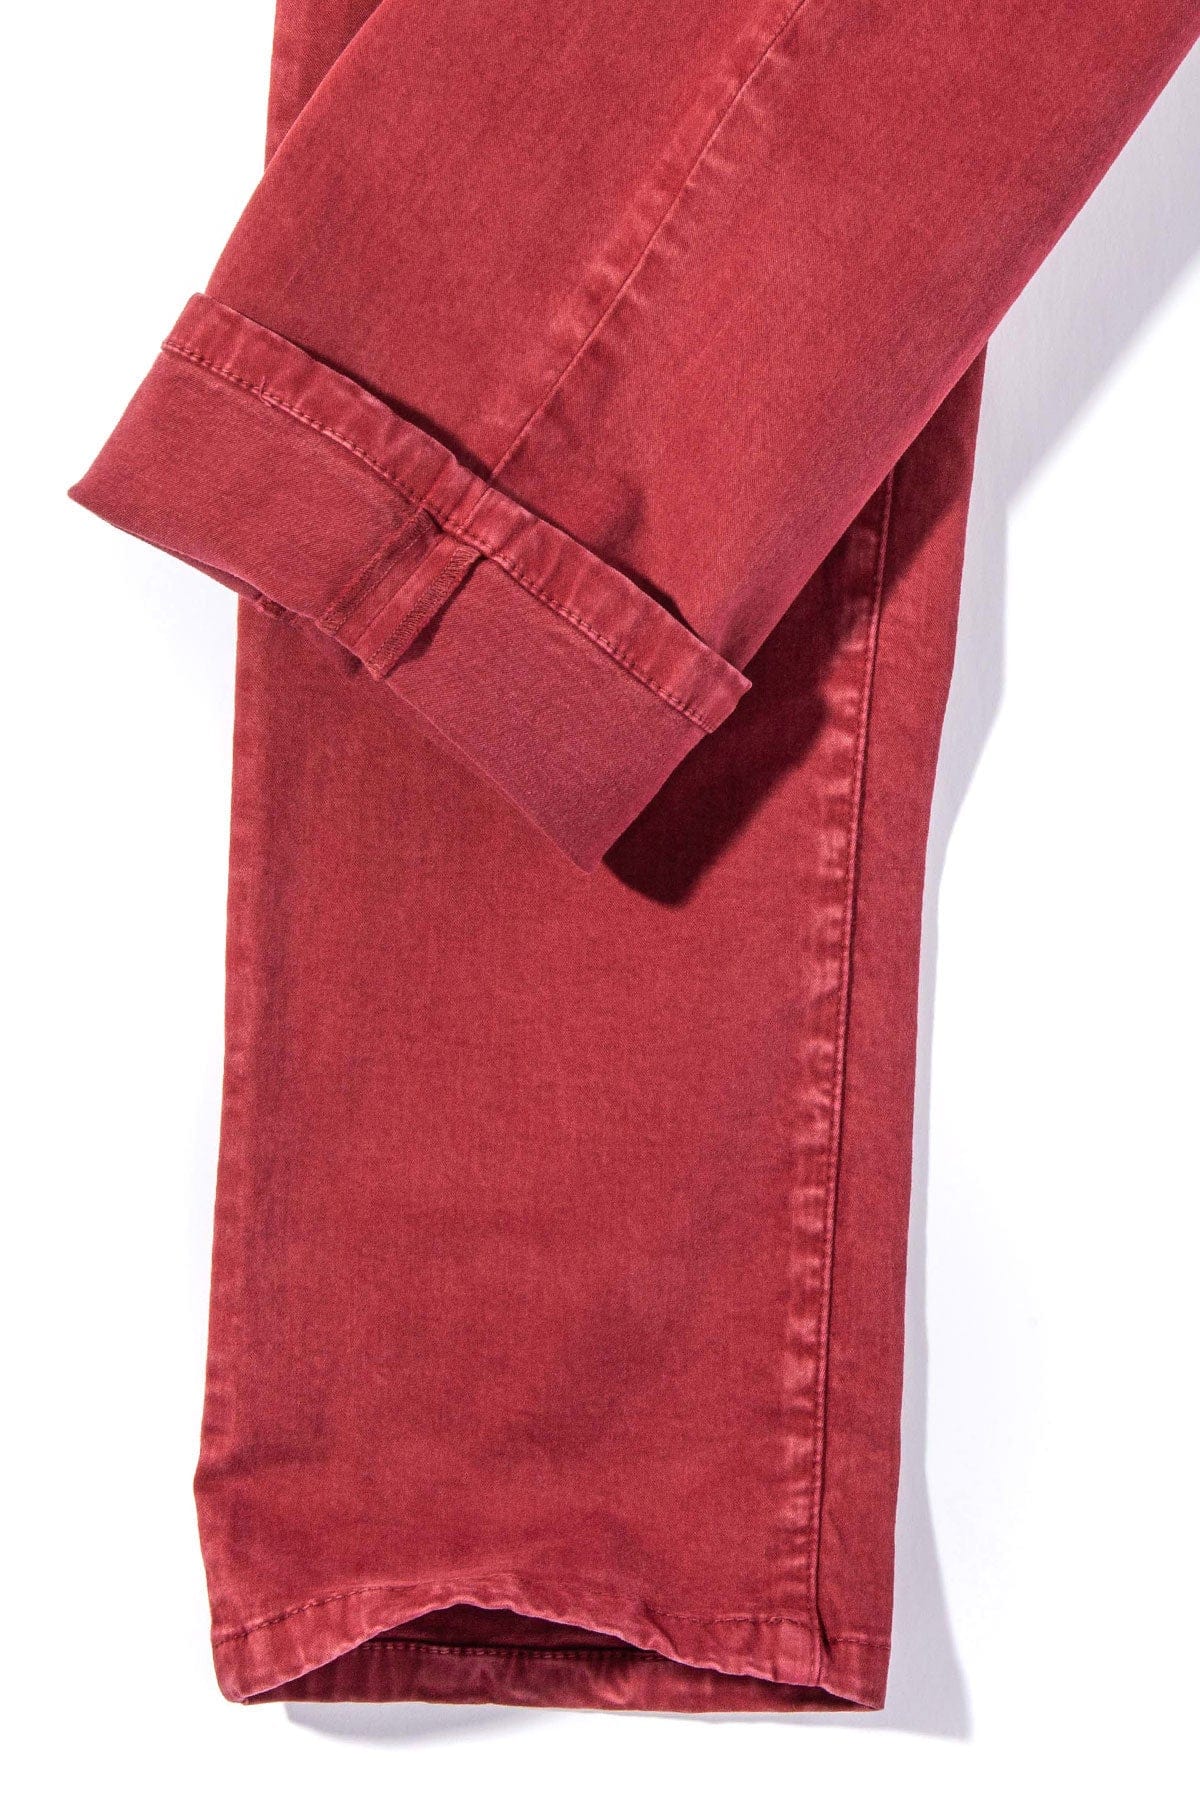 Ryland Rugged Soft Touch Cotton Jeans in Cherry - AXEL'S